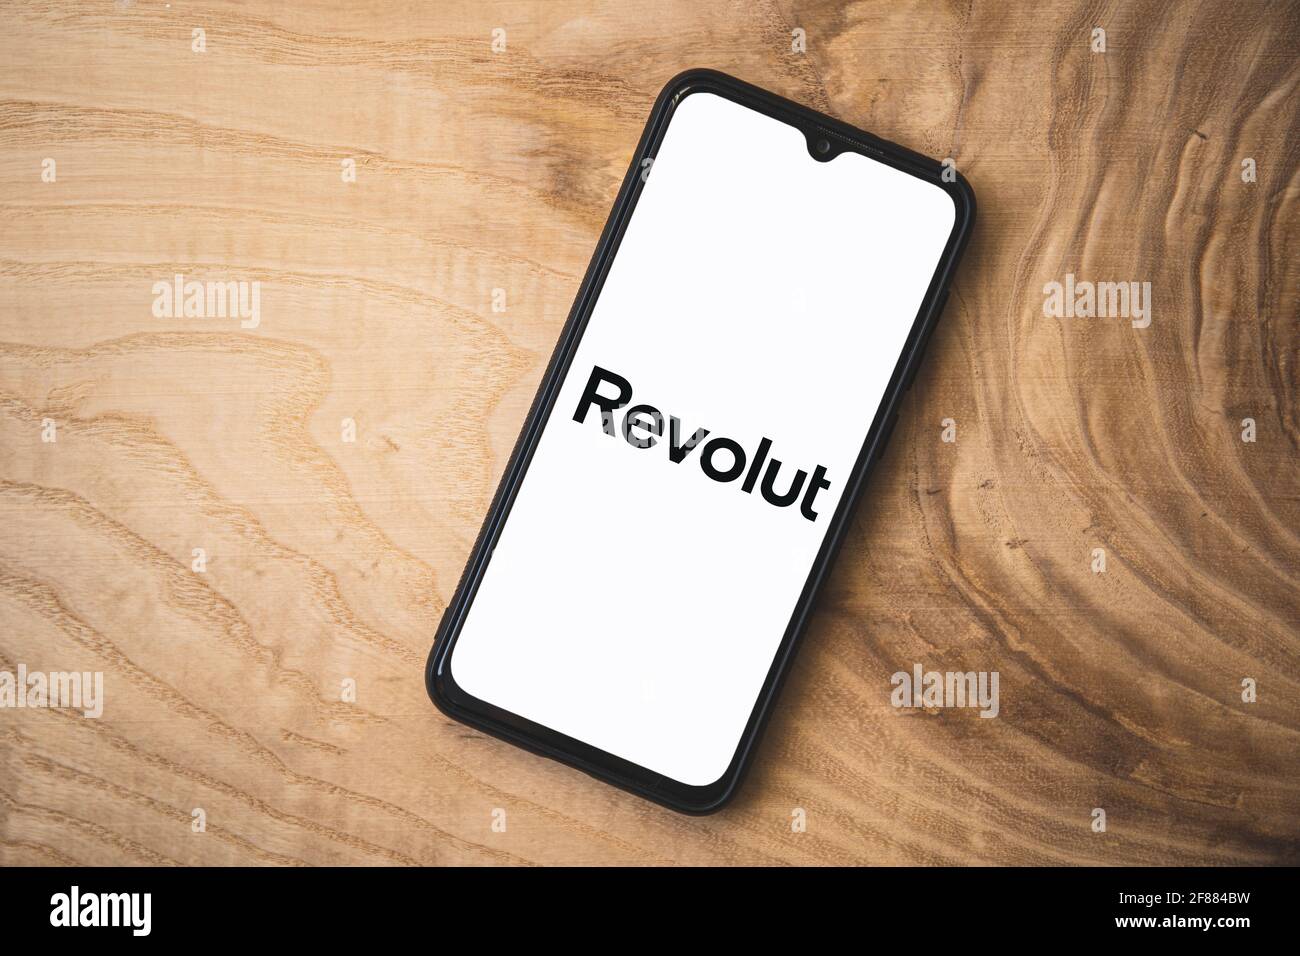 Revolut is an English financial technology company headquartered in London, England, that offers banking services. Stock Photo